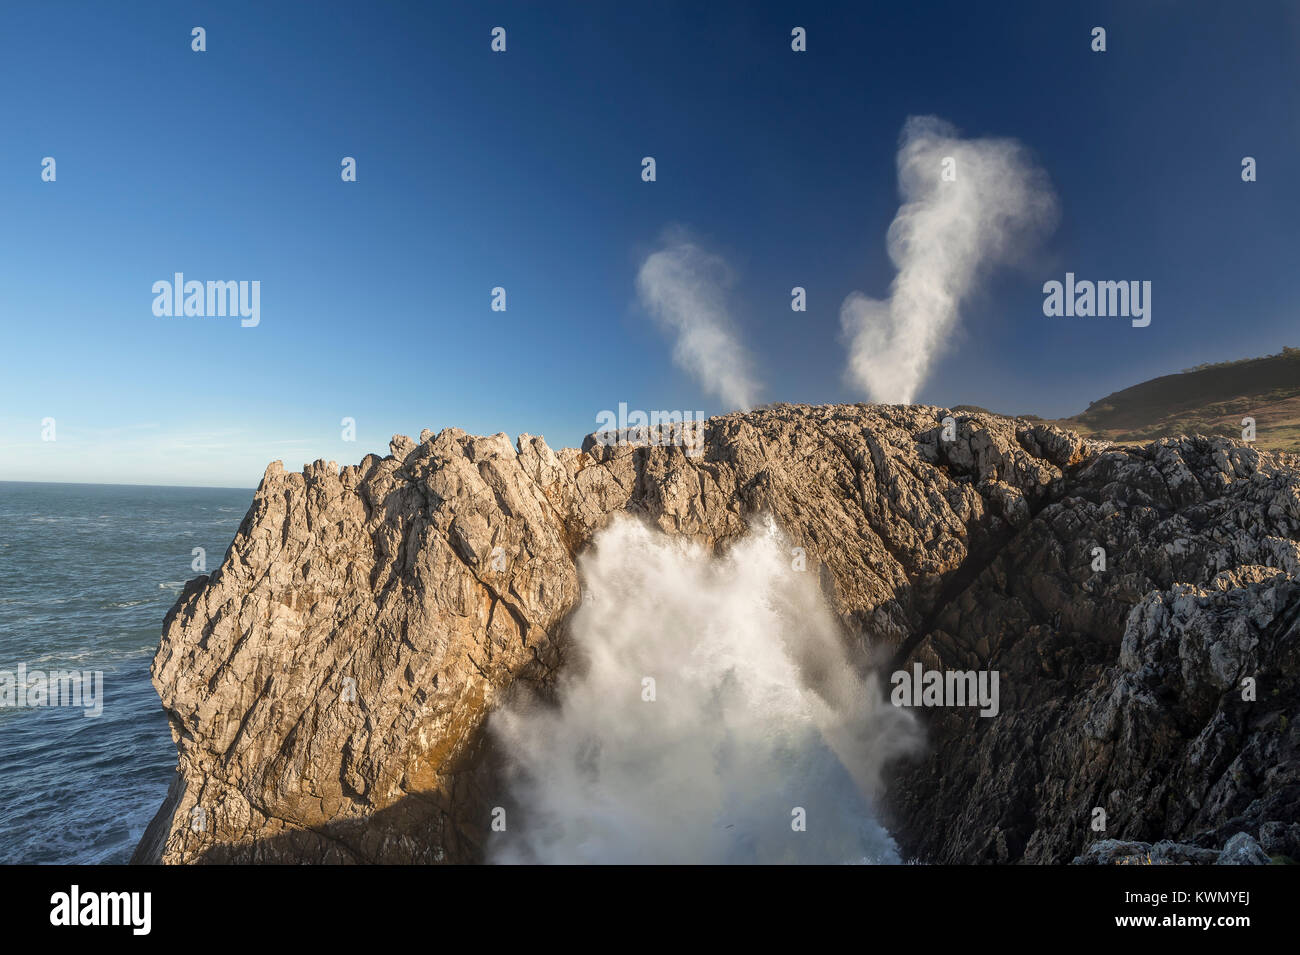 Waves crushing against a cliff and geysers Stock Photo